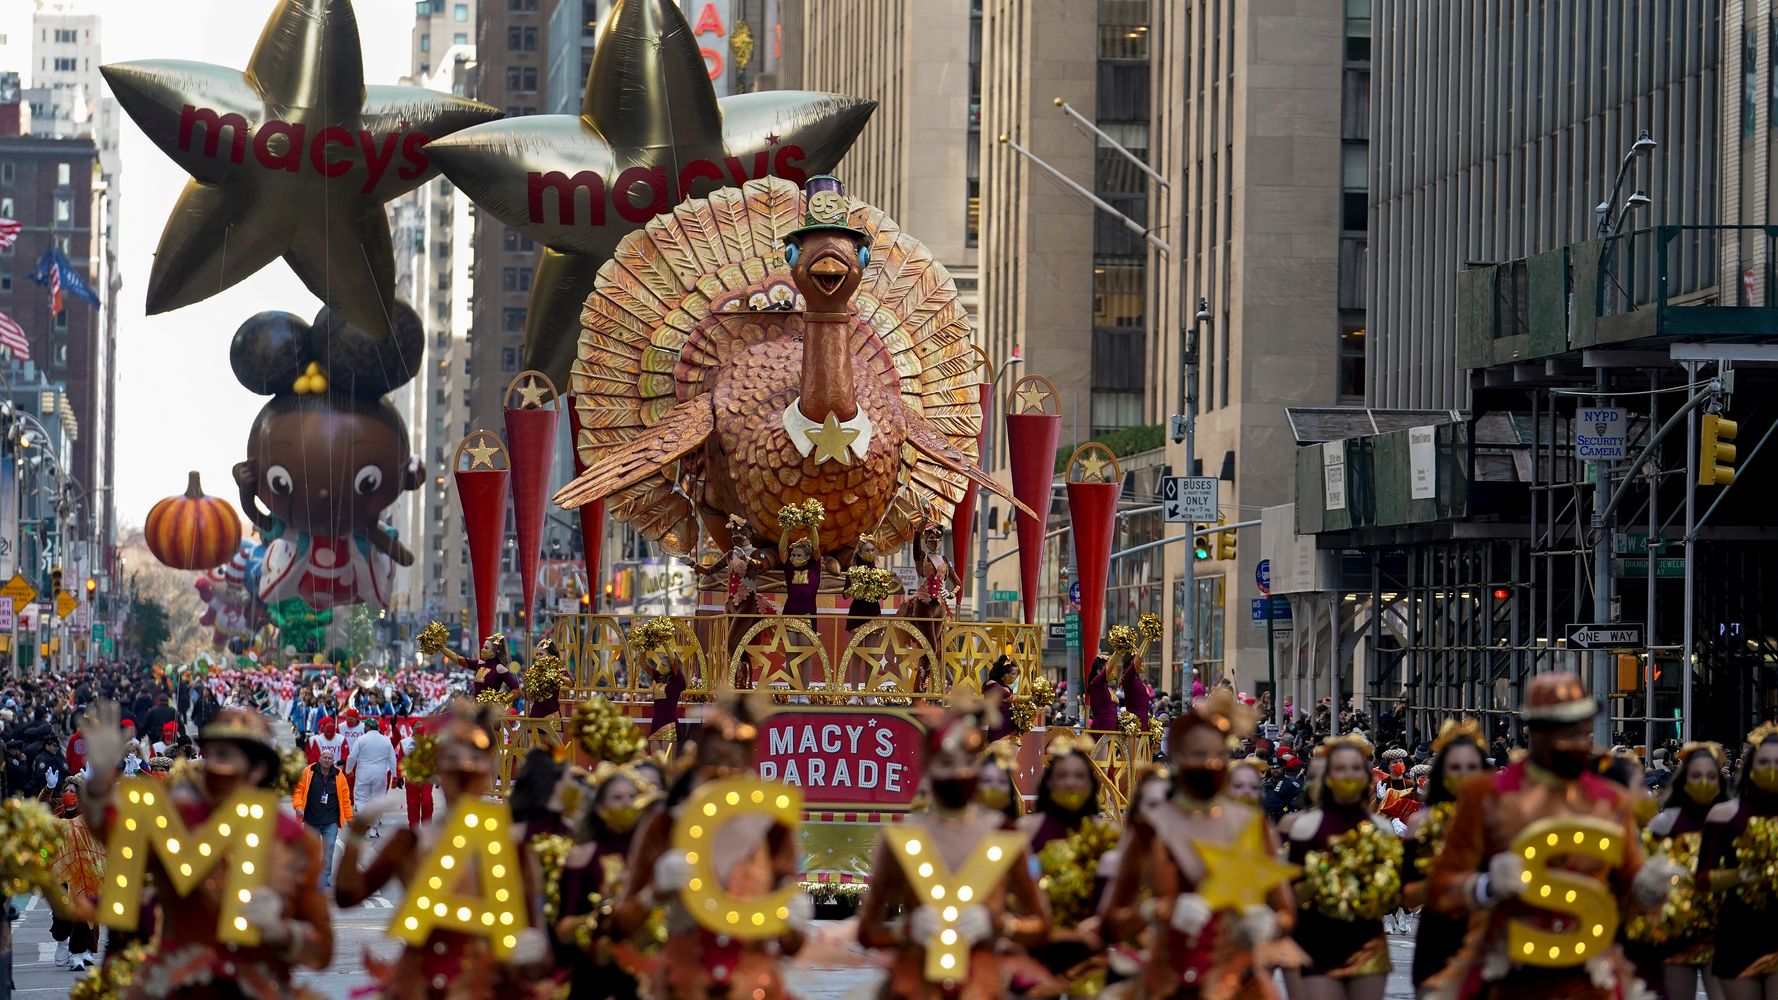 Macy’s Thanksgiving Parade Returns, With All The Trimmings